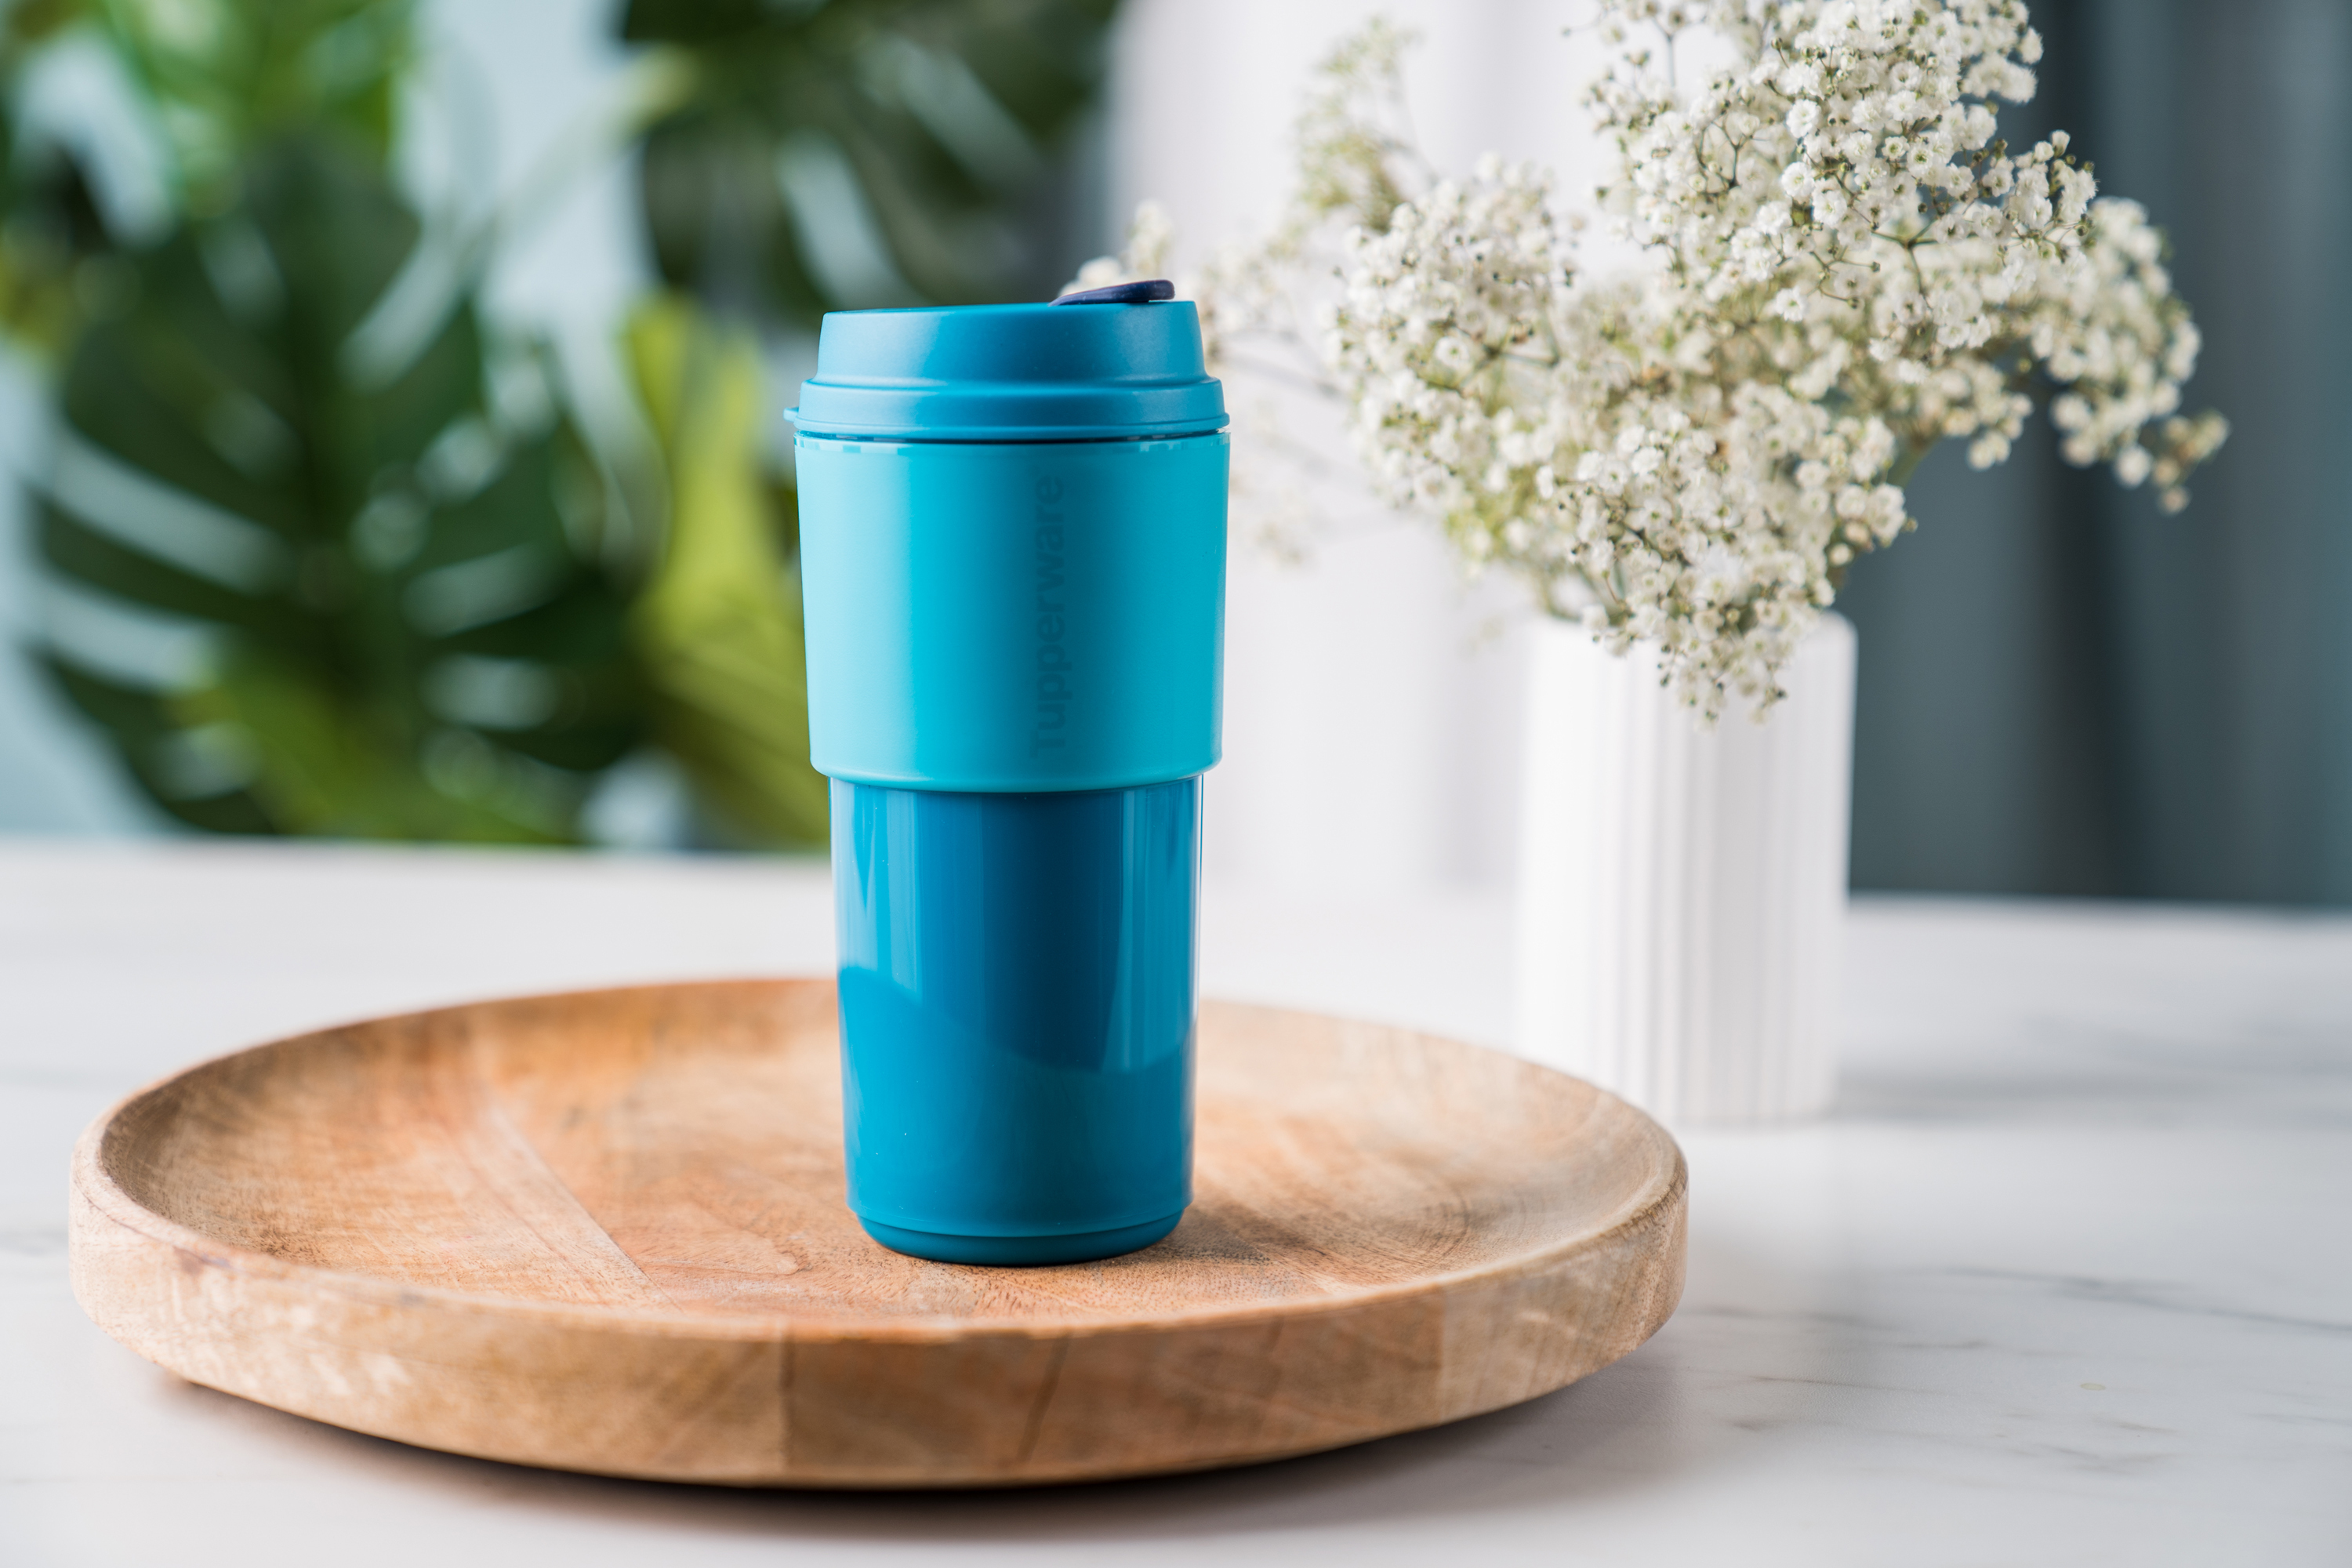 Borealis Bornewables™ grade enables Tupperware® to extend its reusable and  recyclable ECO+ product line for even greater sustainability - Borealis